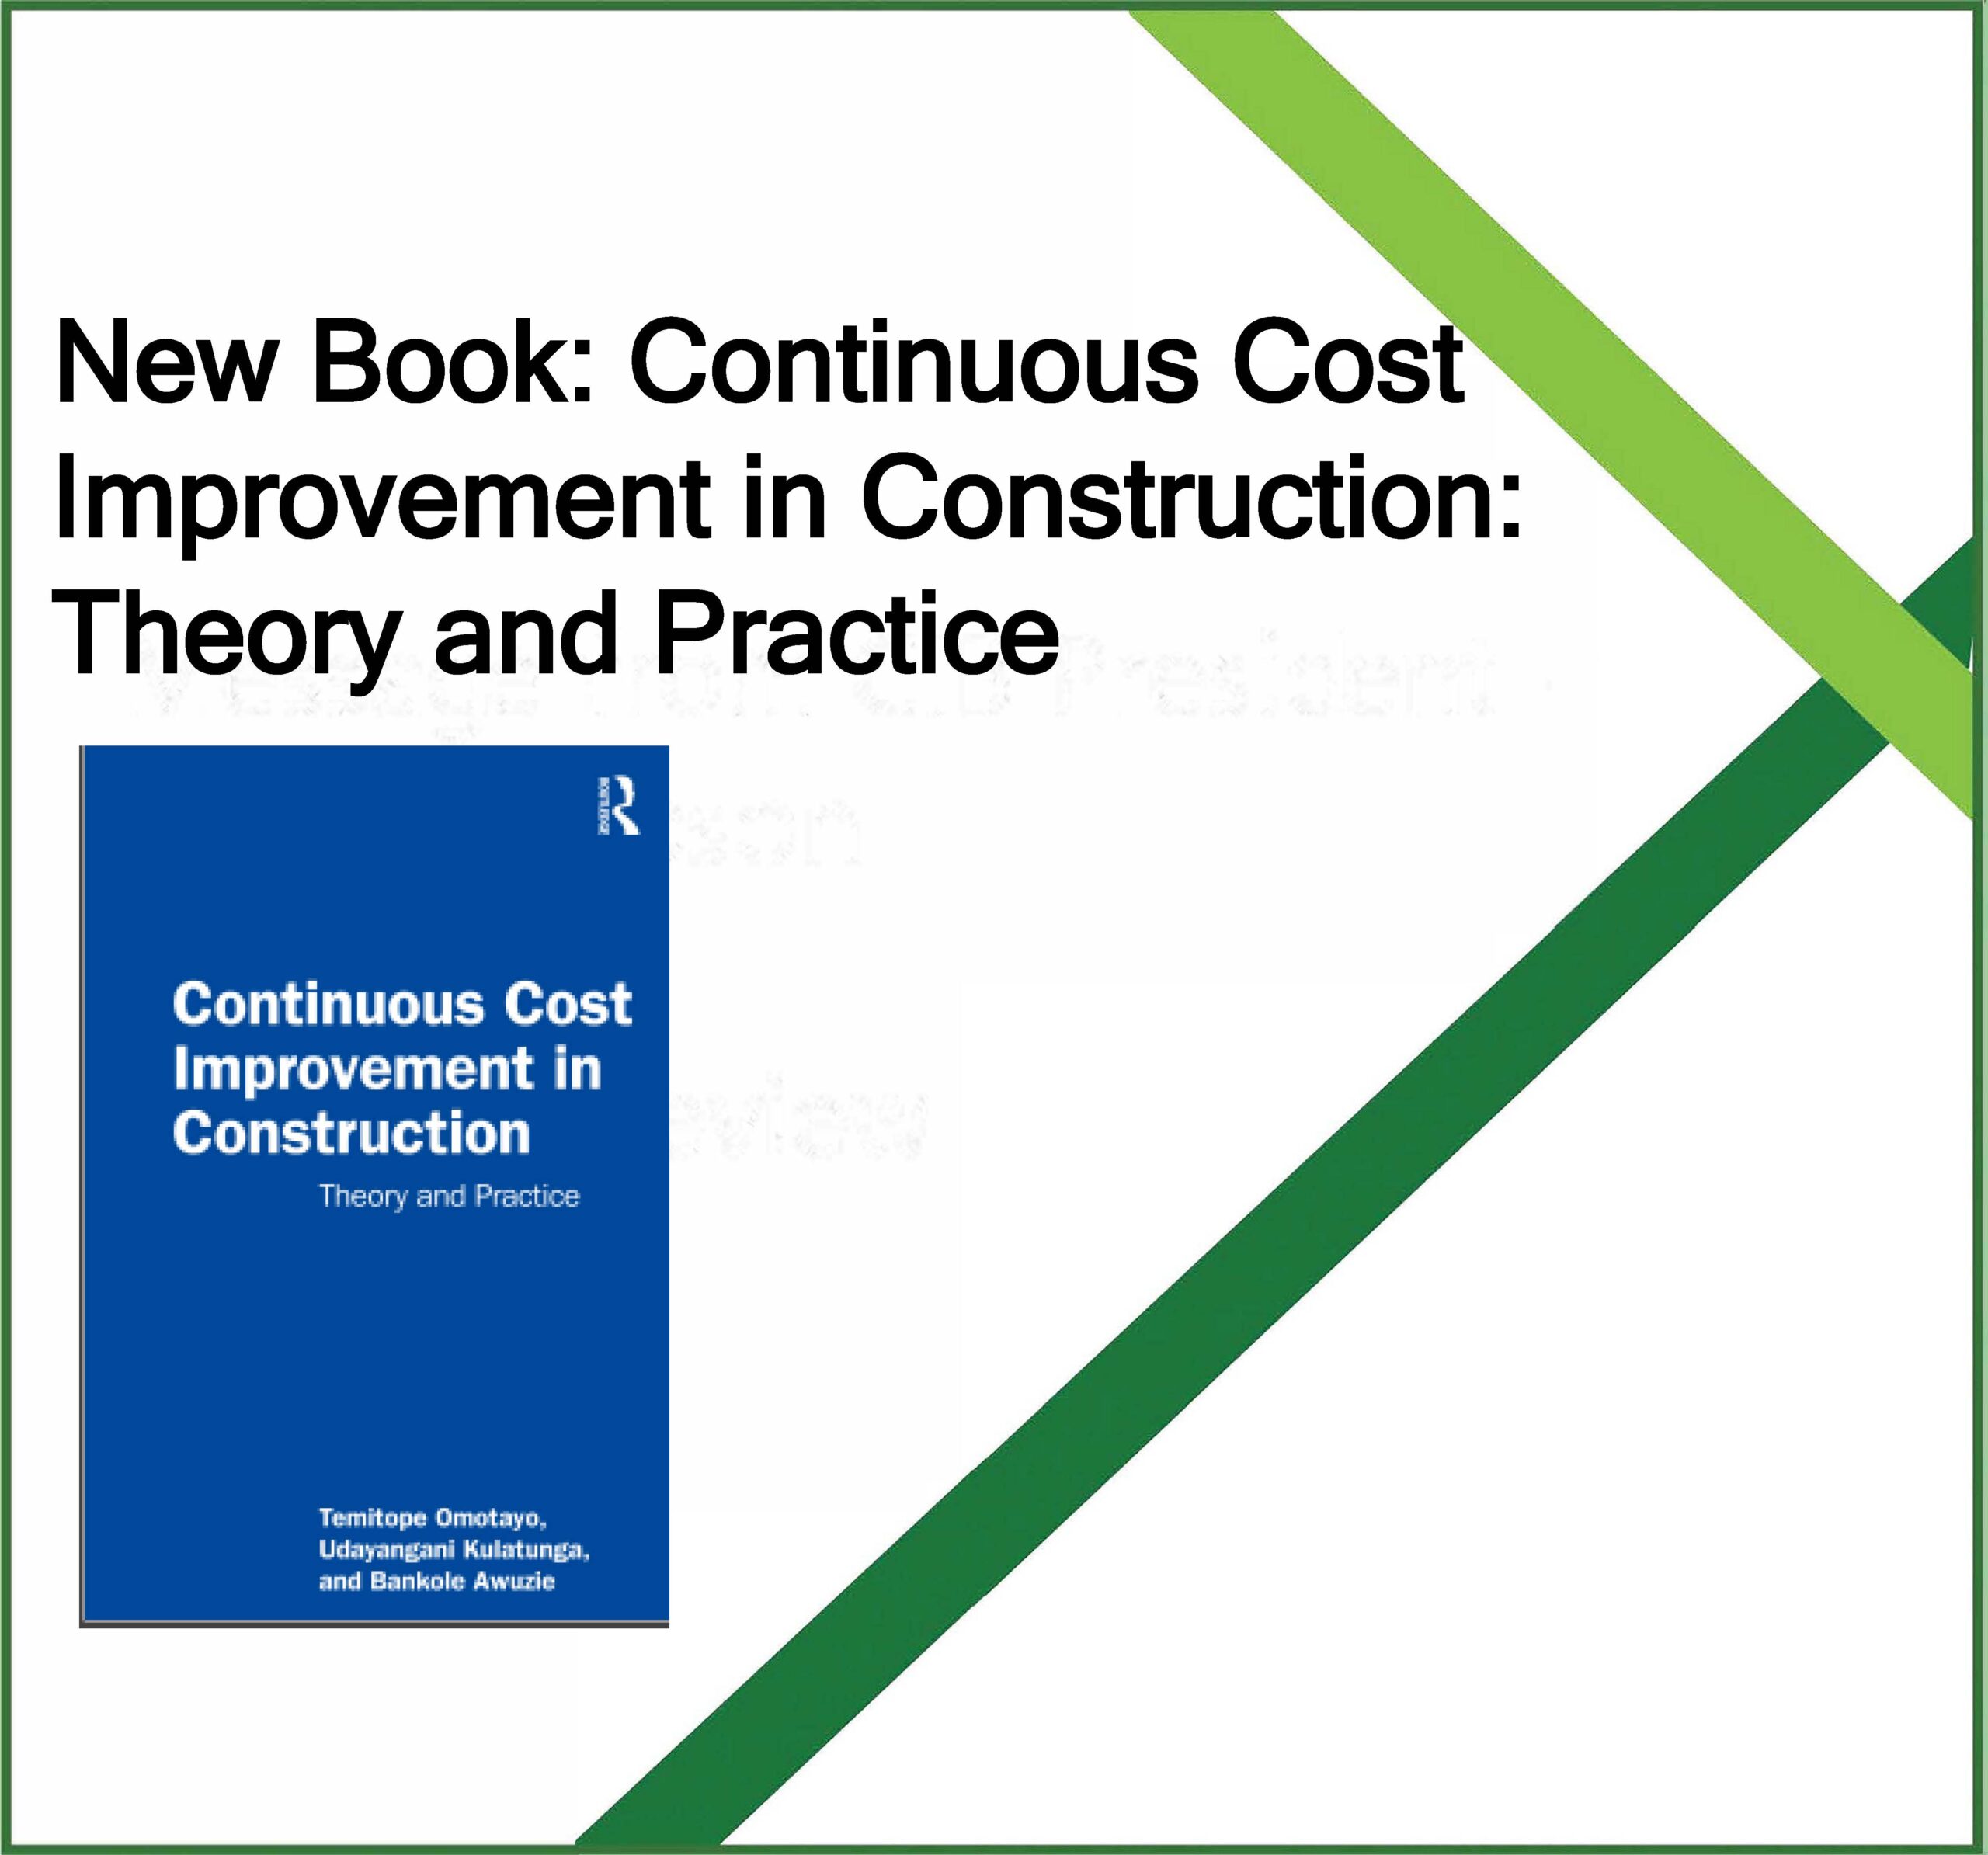 New Book: Continuous Cost Improvement in Construction: Theory and Practice